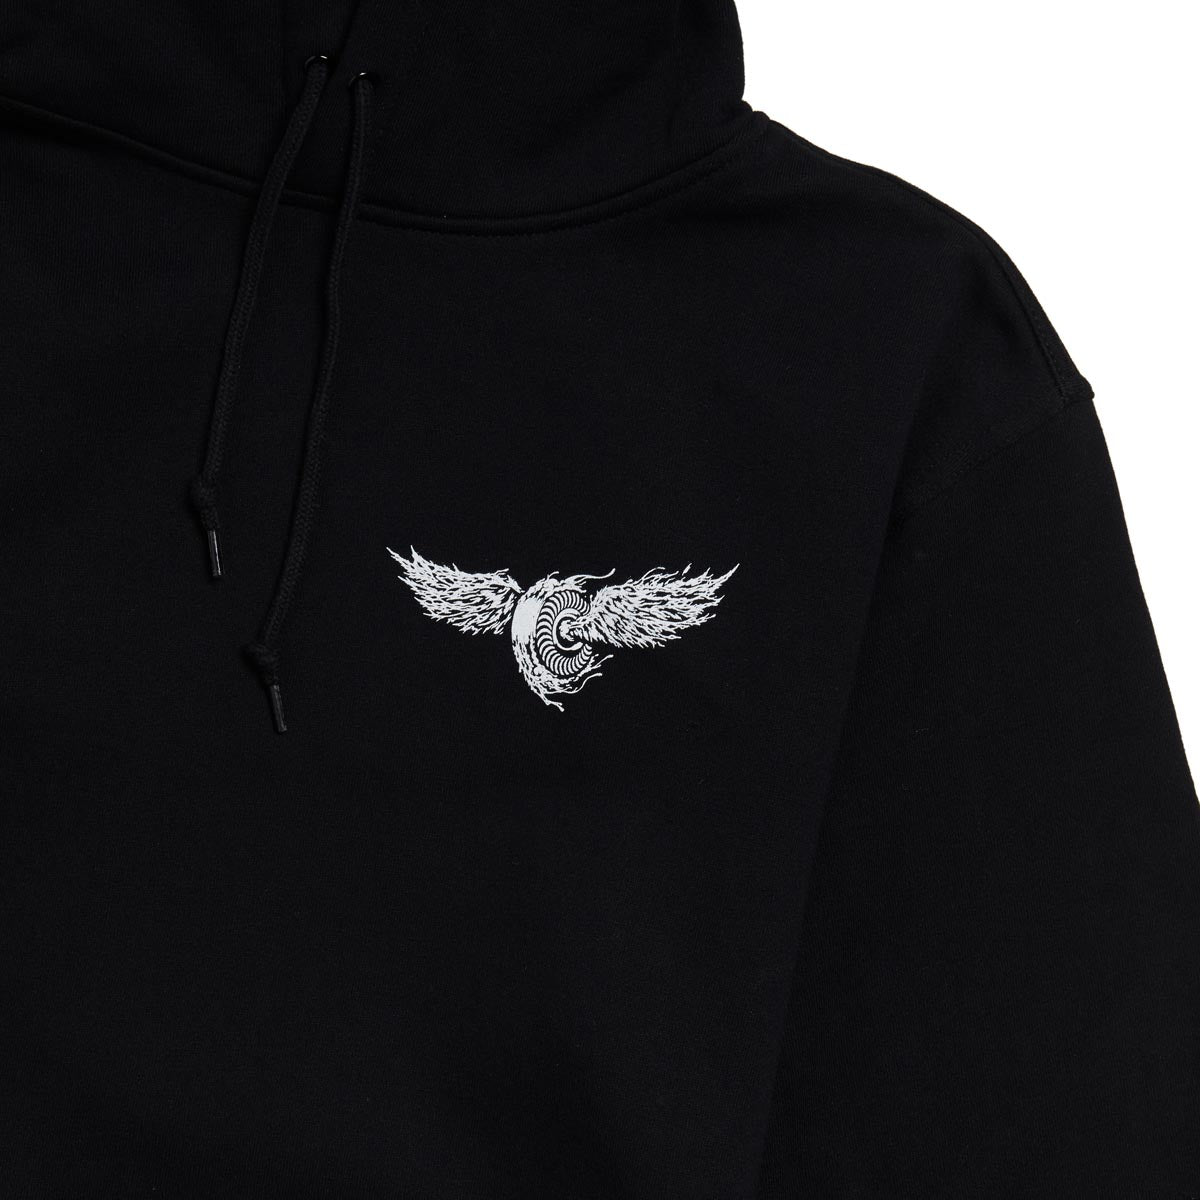 Spitfire Decay Flying Classic Hoodie - Black image 3